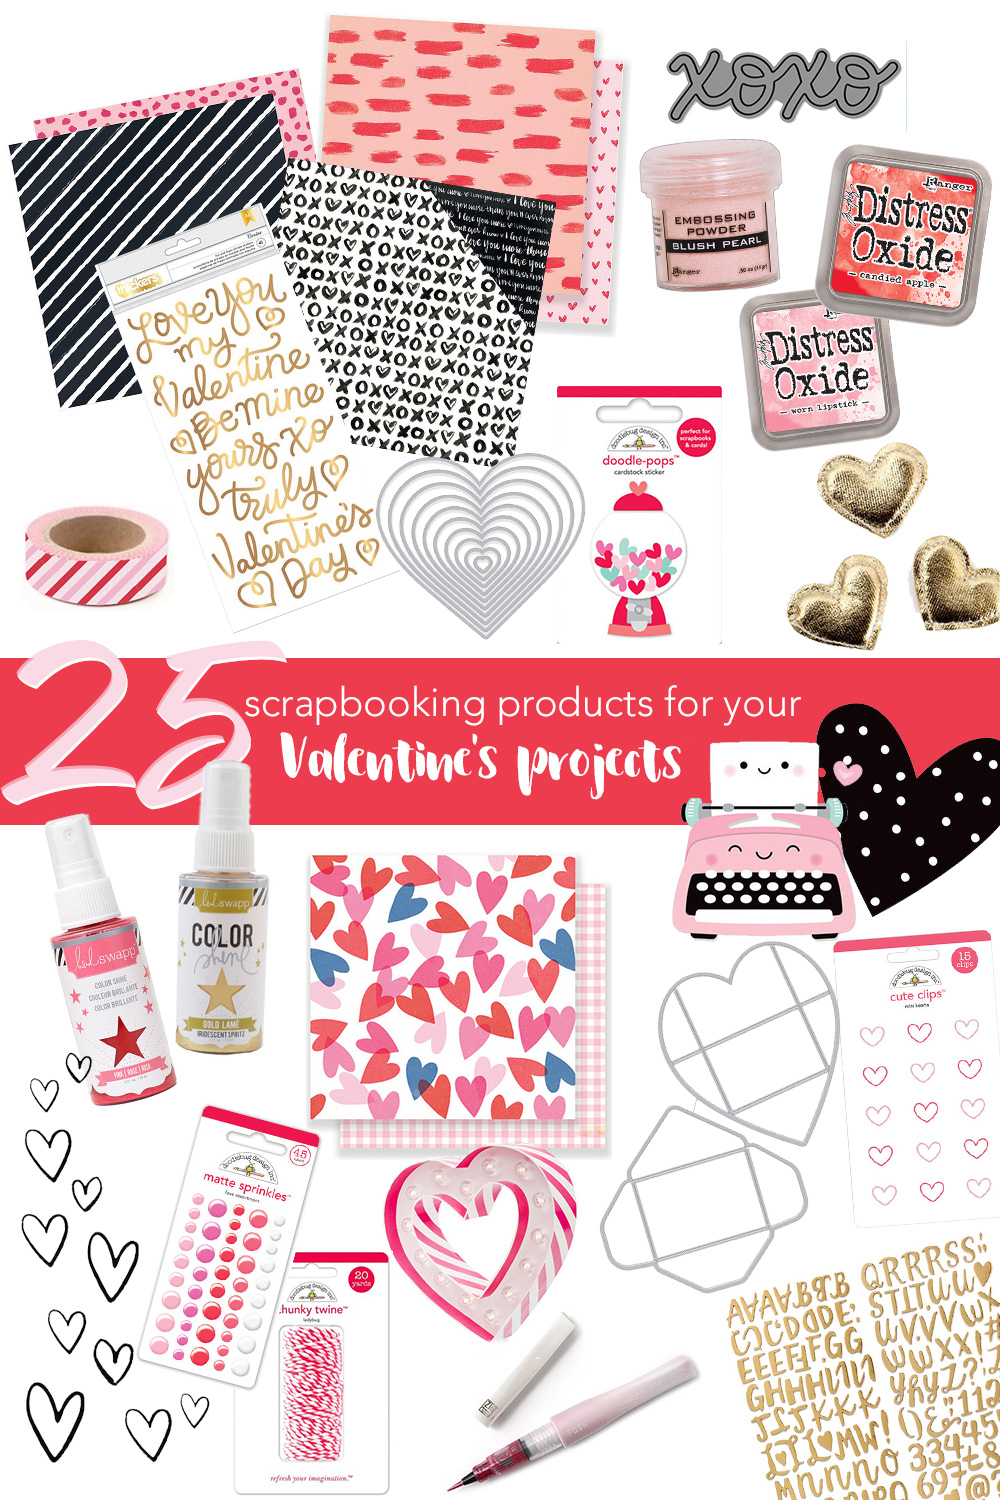 Shopping Guide: 25 Scrapbooking Products for your Valentine's Projects